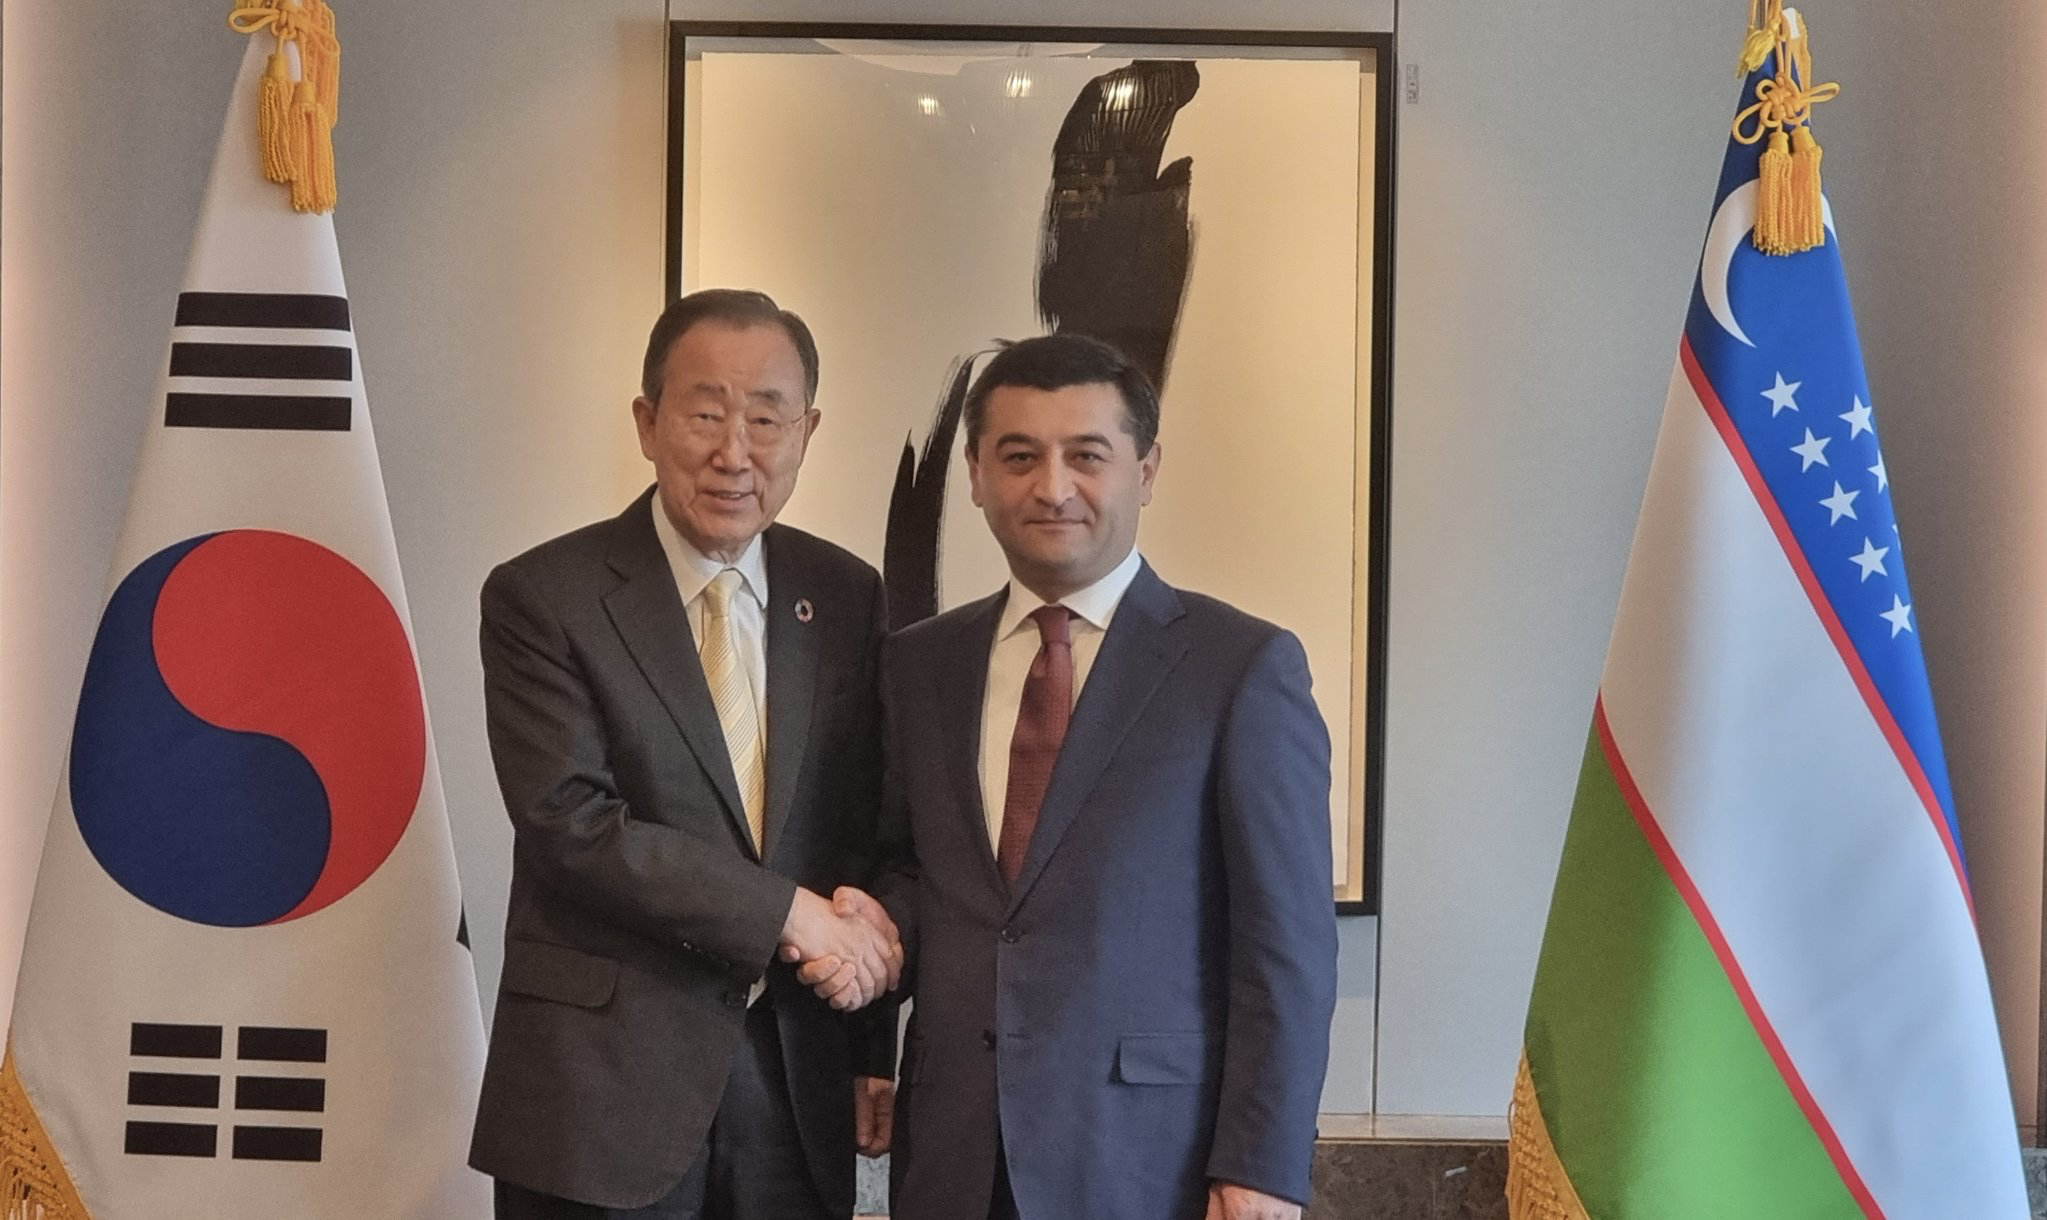 Minister Bakhtiyor Saidov with Ban Ki-moon, President of the Assembly and Chair of the Council of the Global Green Growth Institute (GGGI)